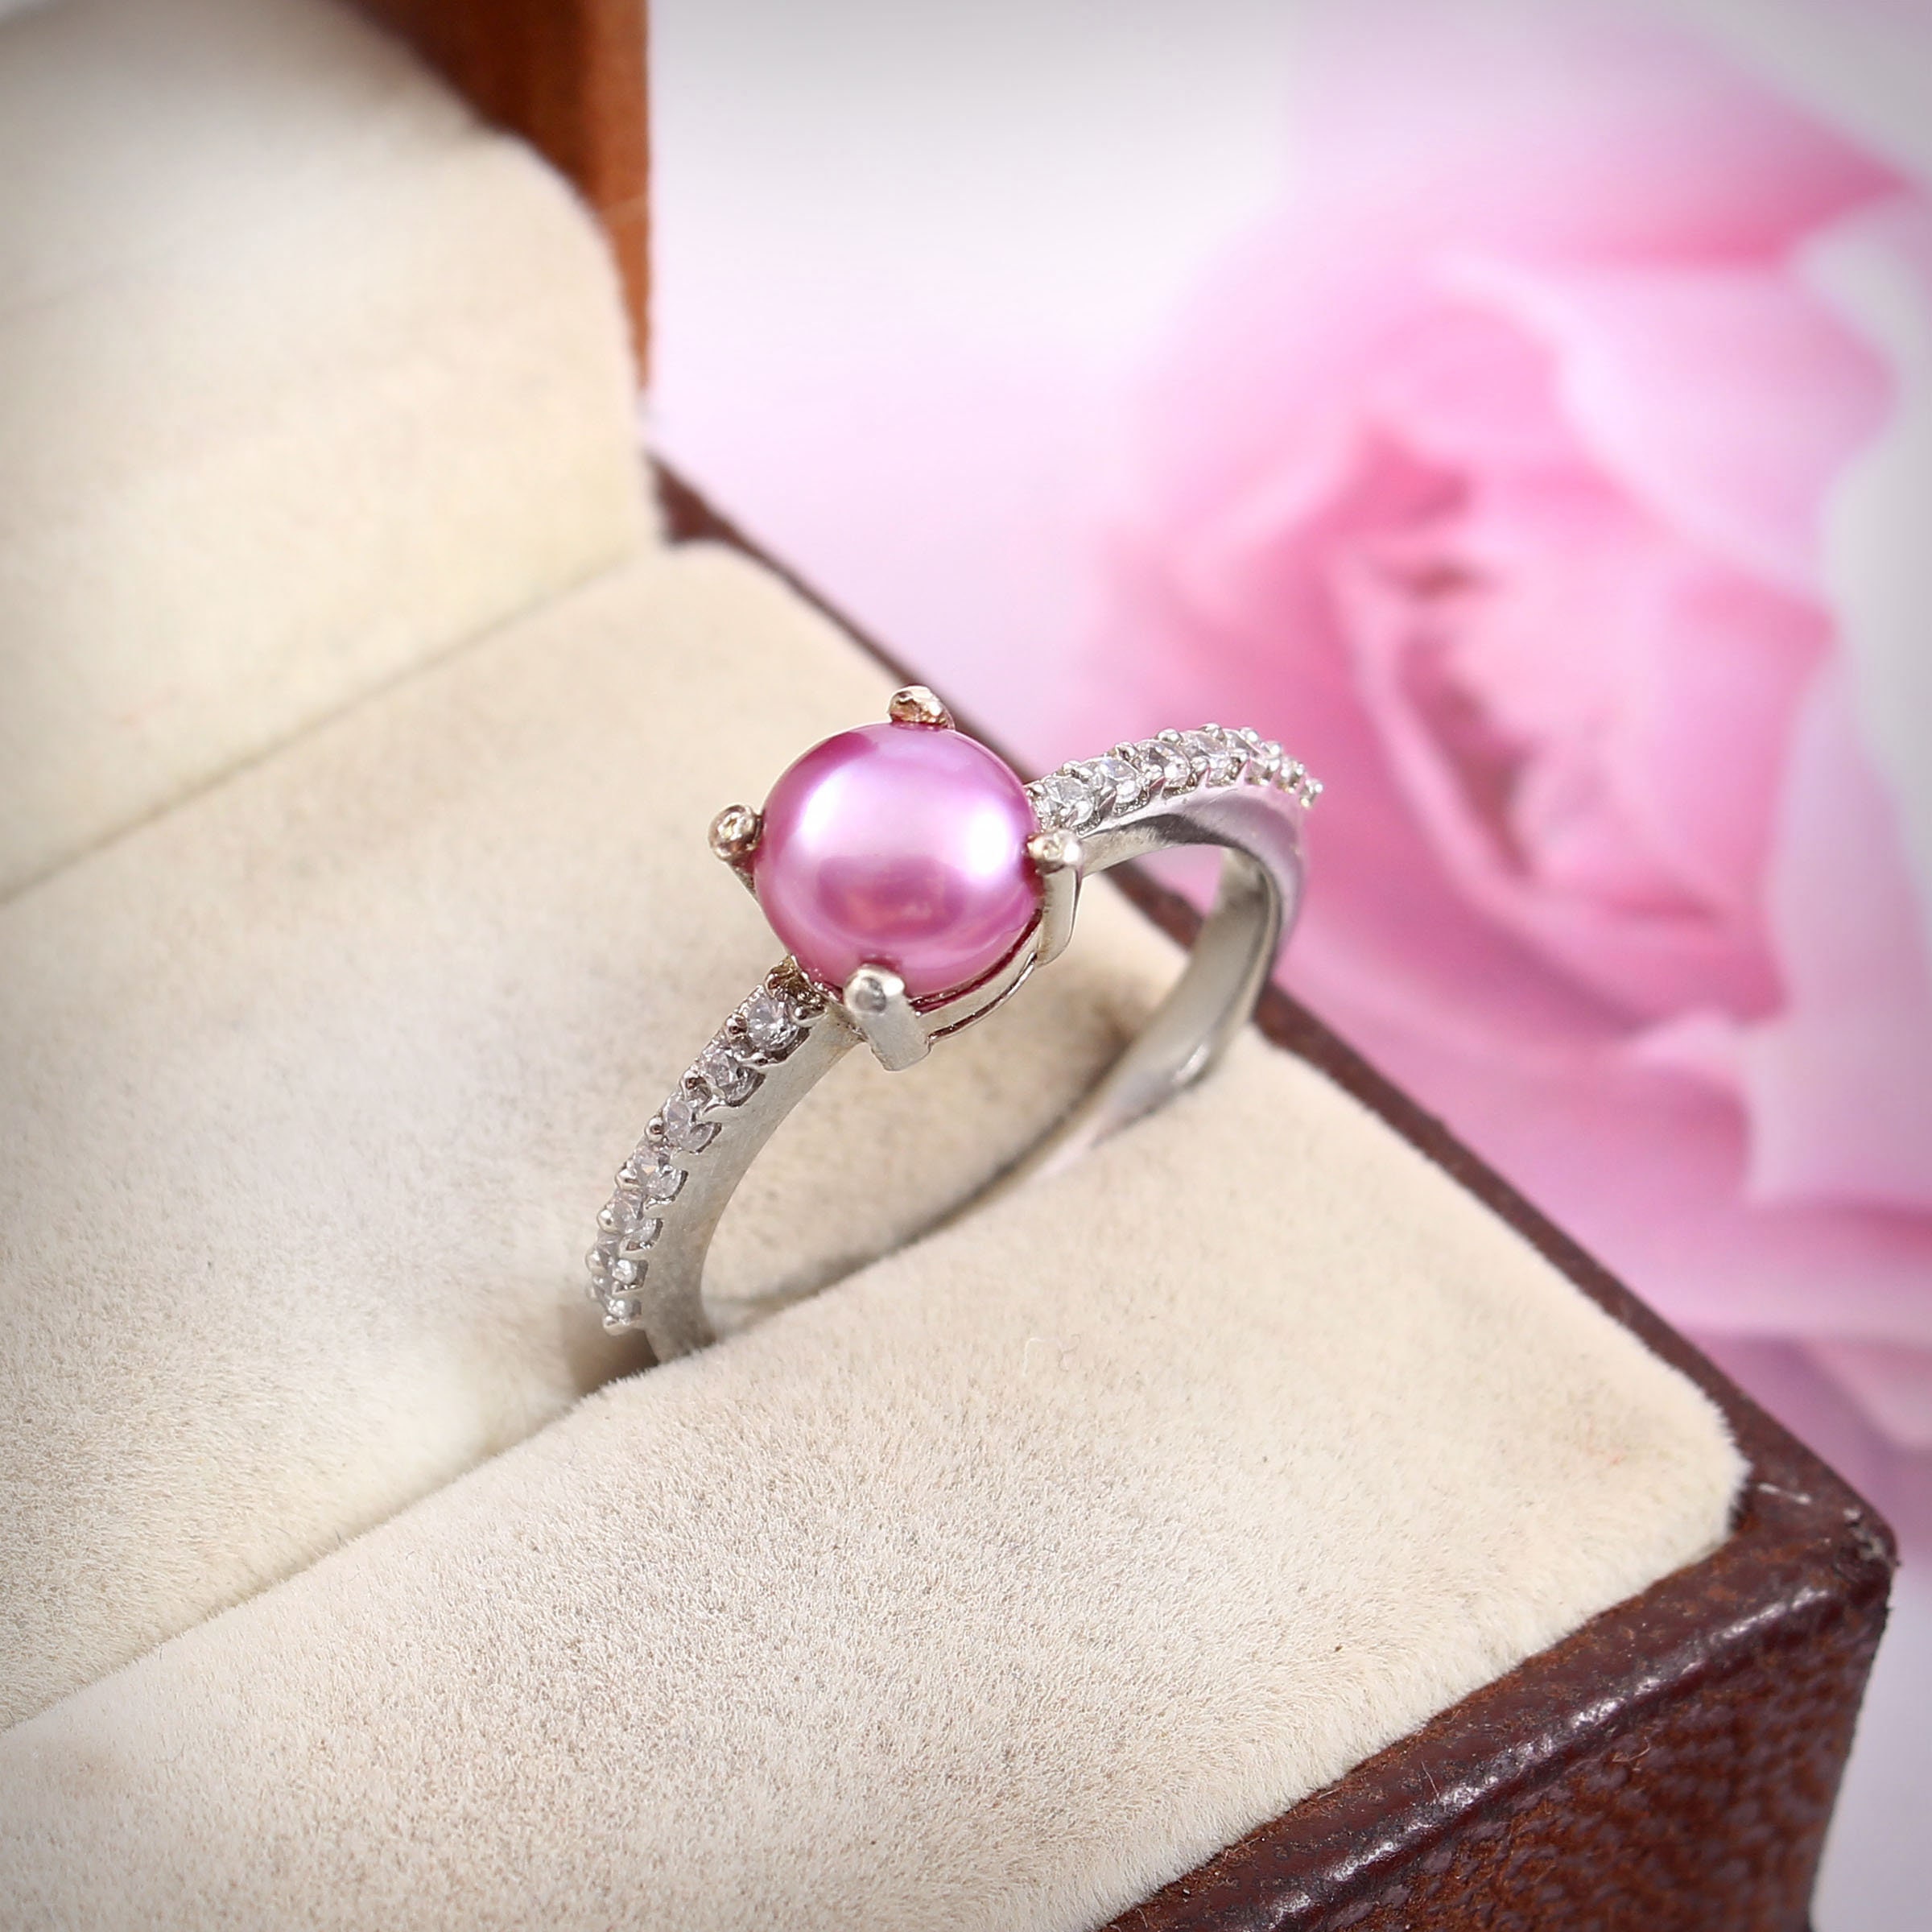 HONORA COLLECTION STERLING SILVER PINK CULTURED PEARL RING SIZE 6 NIB  RV$110 | eBay